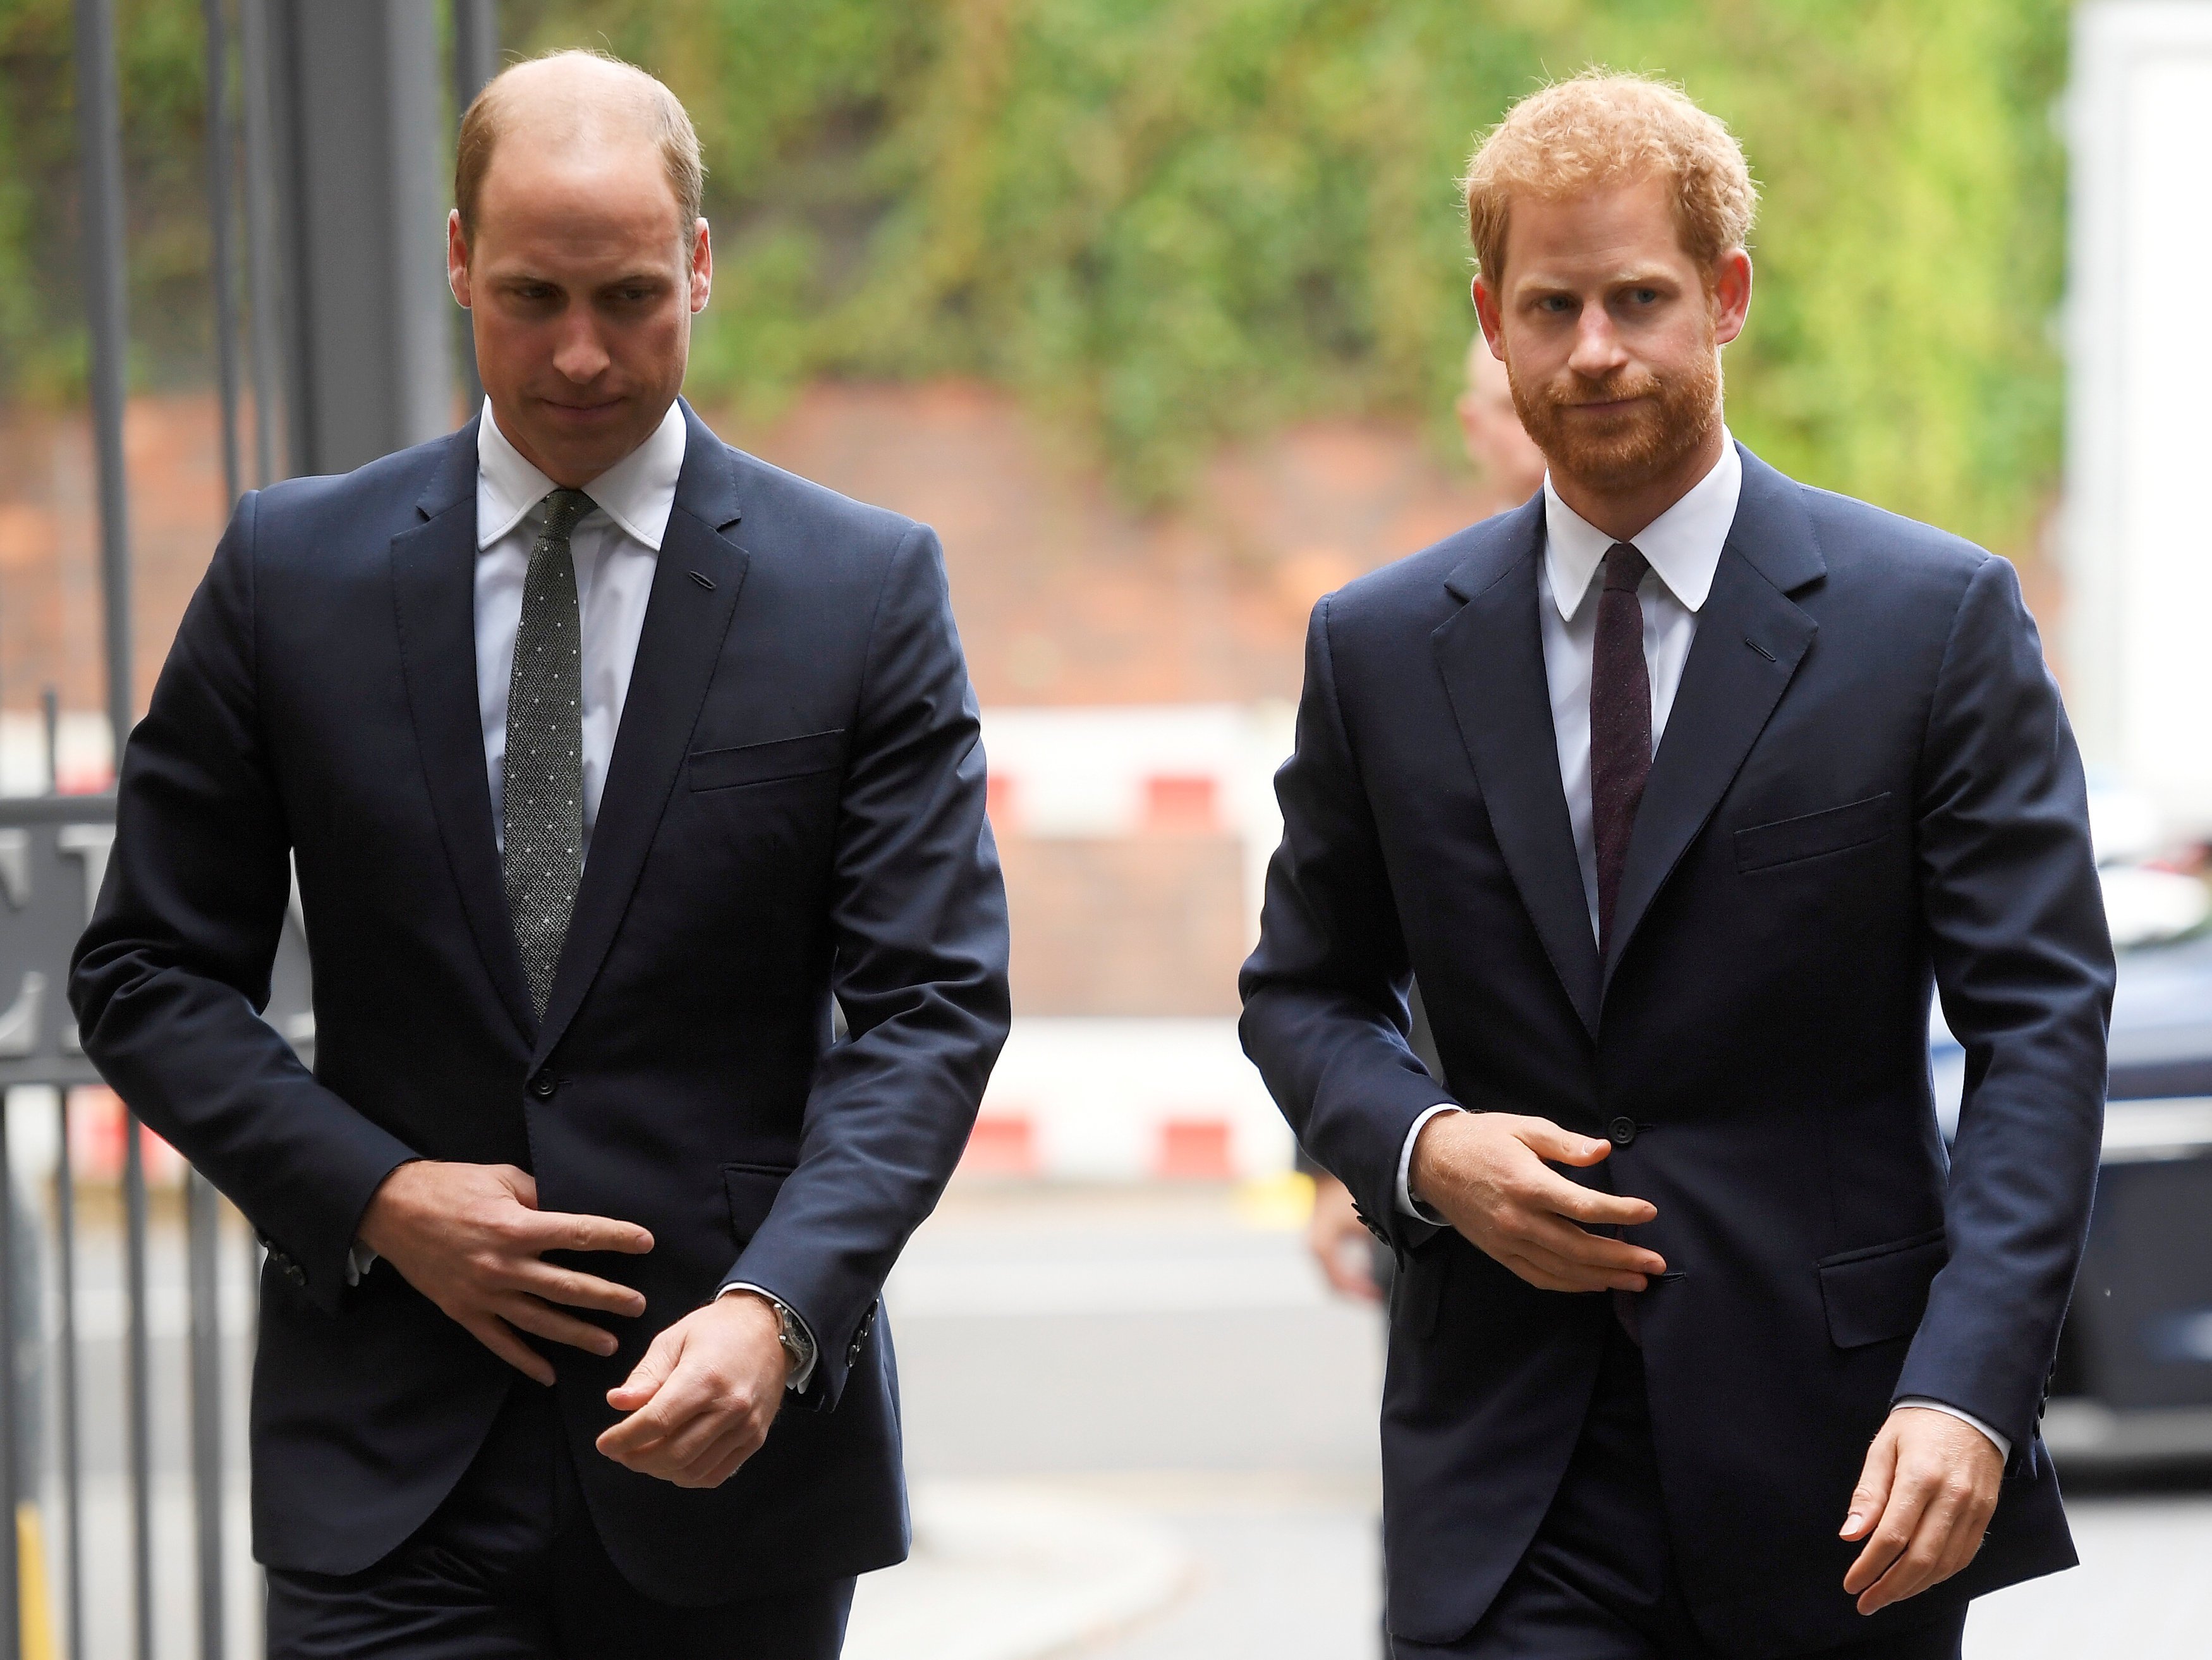 Prince William and Prince Harry at the Royal Foundation Support4Grenfell community hub on September 5, 2017 in London, England. | Source: Getty Images